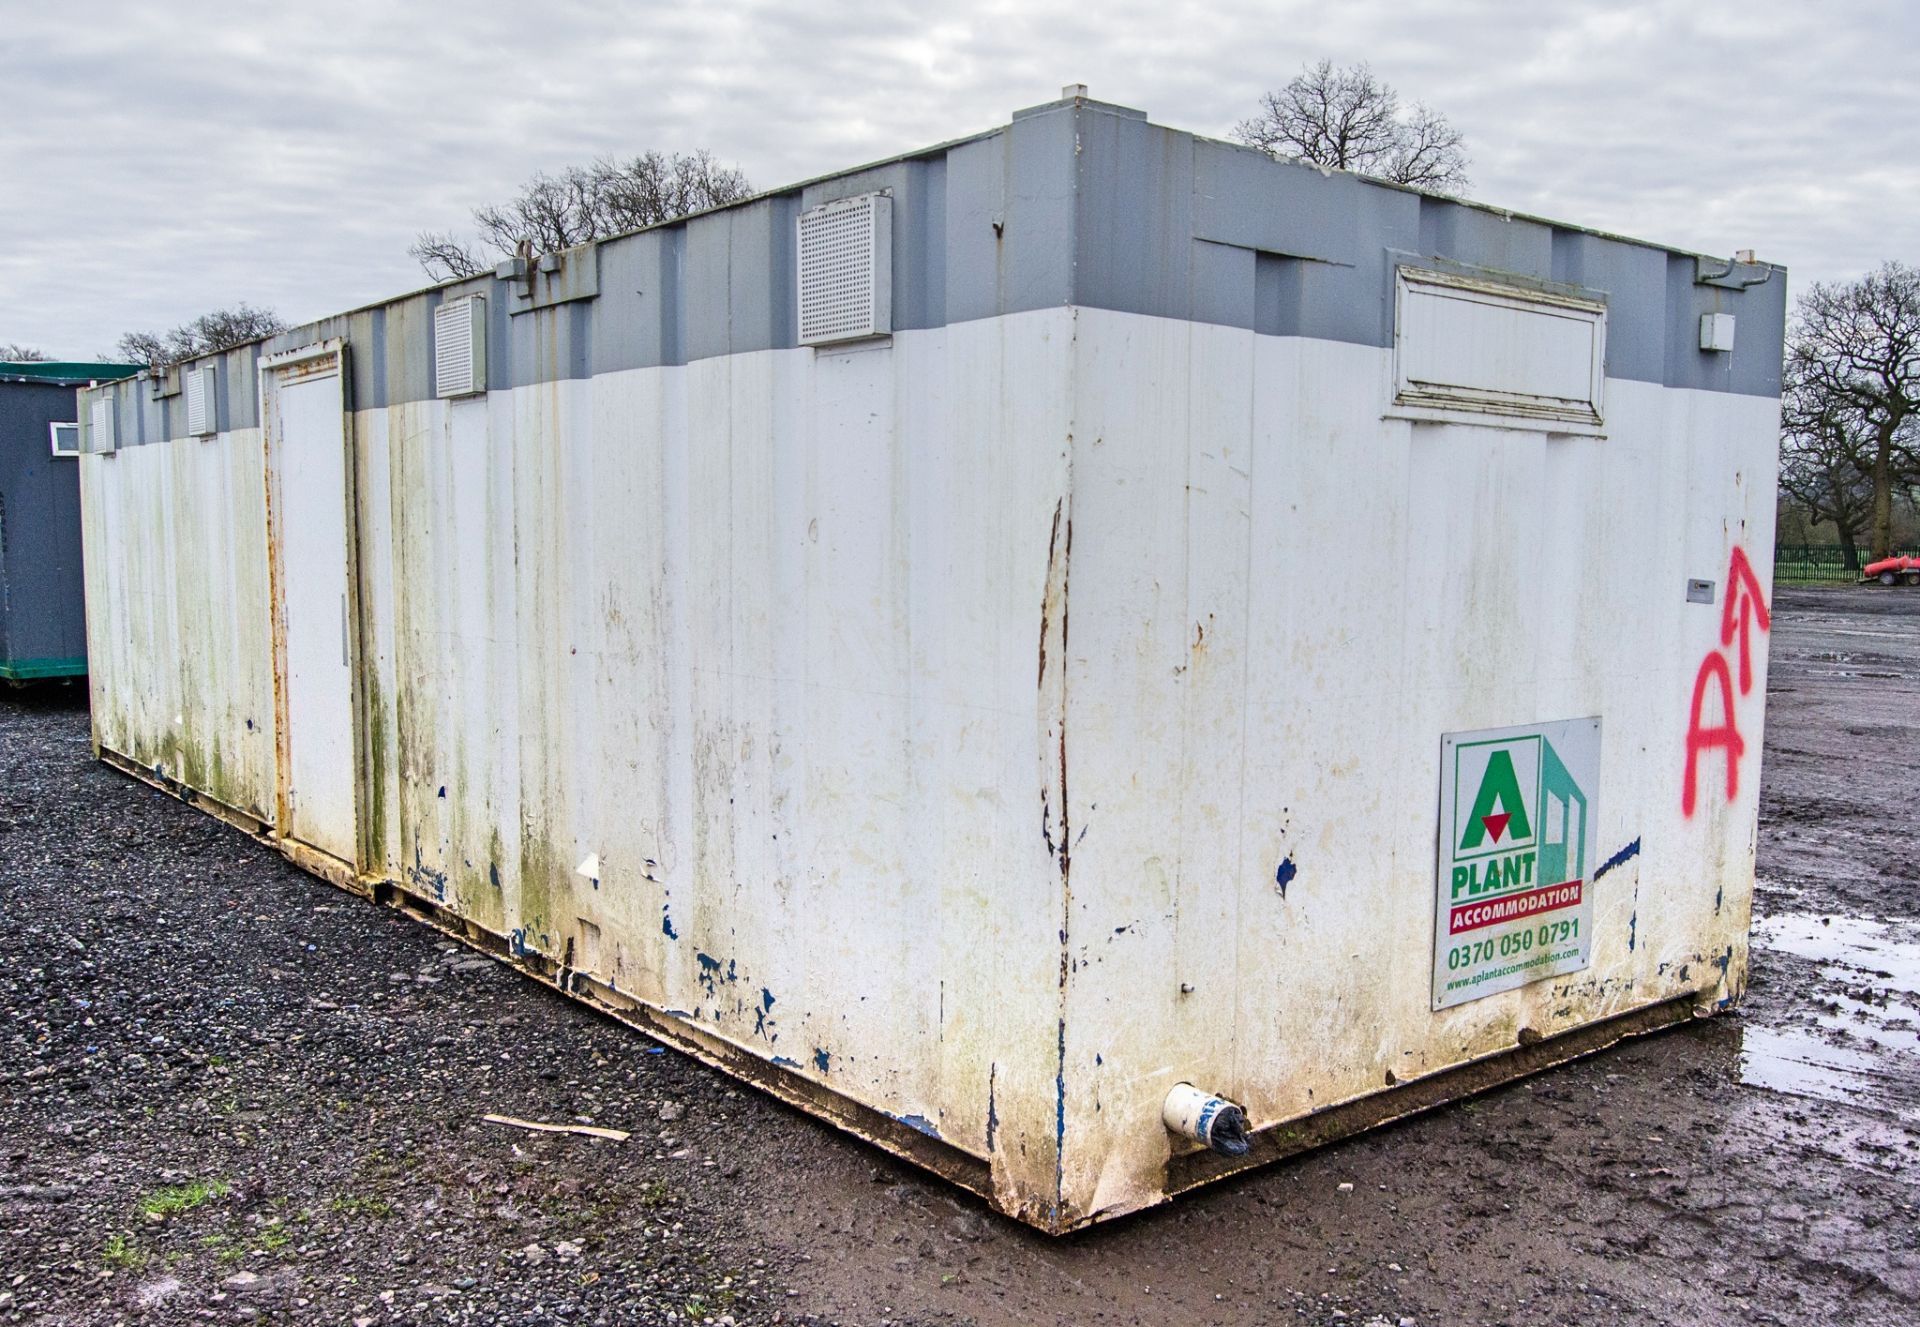 32ft x 10ft steel 4+2 toilet site unit Comprising of: Gents toilet(4 - cubicles, 2 - urinals & - Image 3 of 11